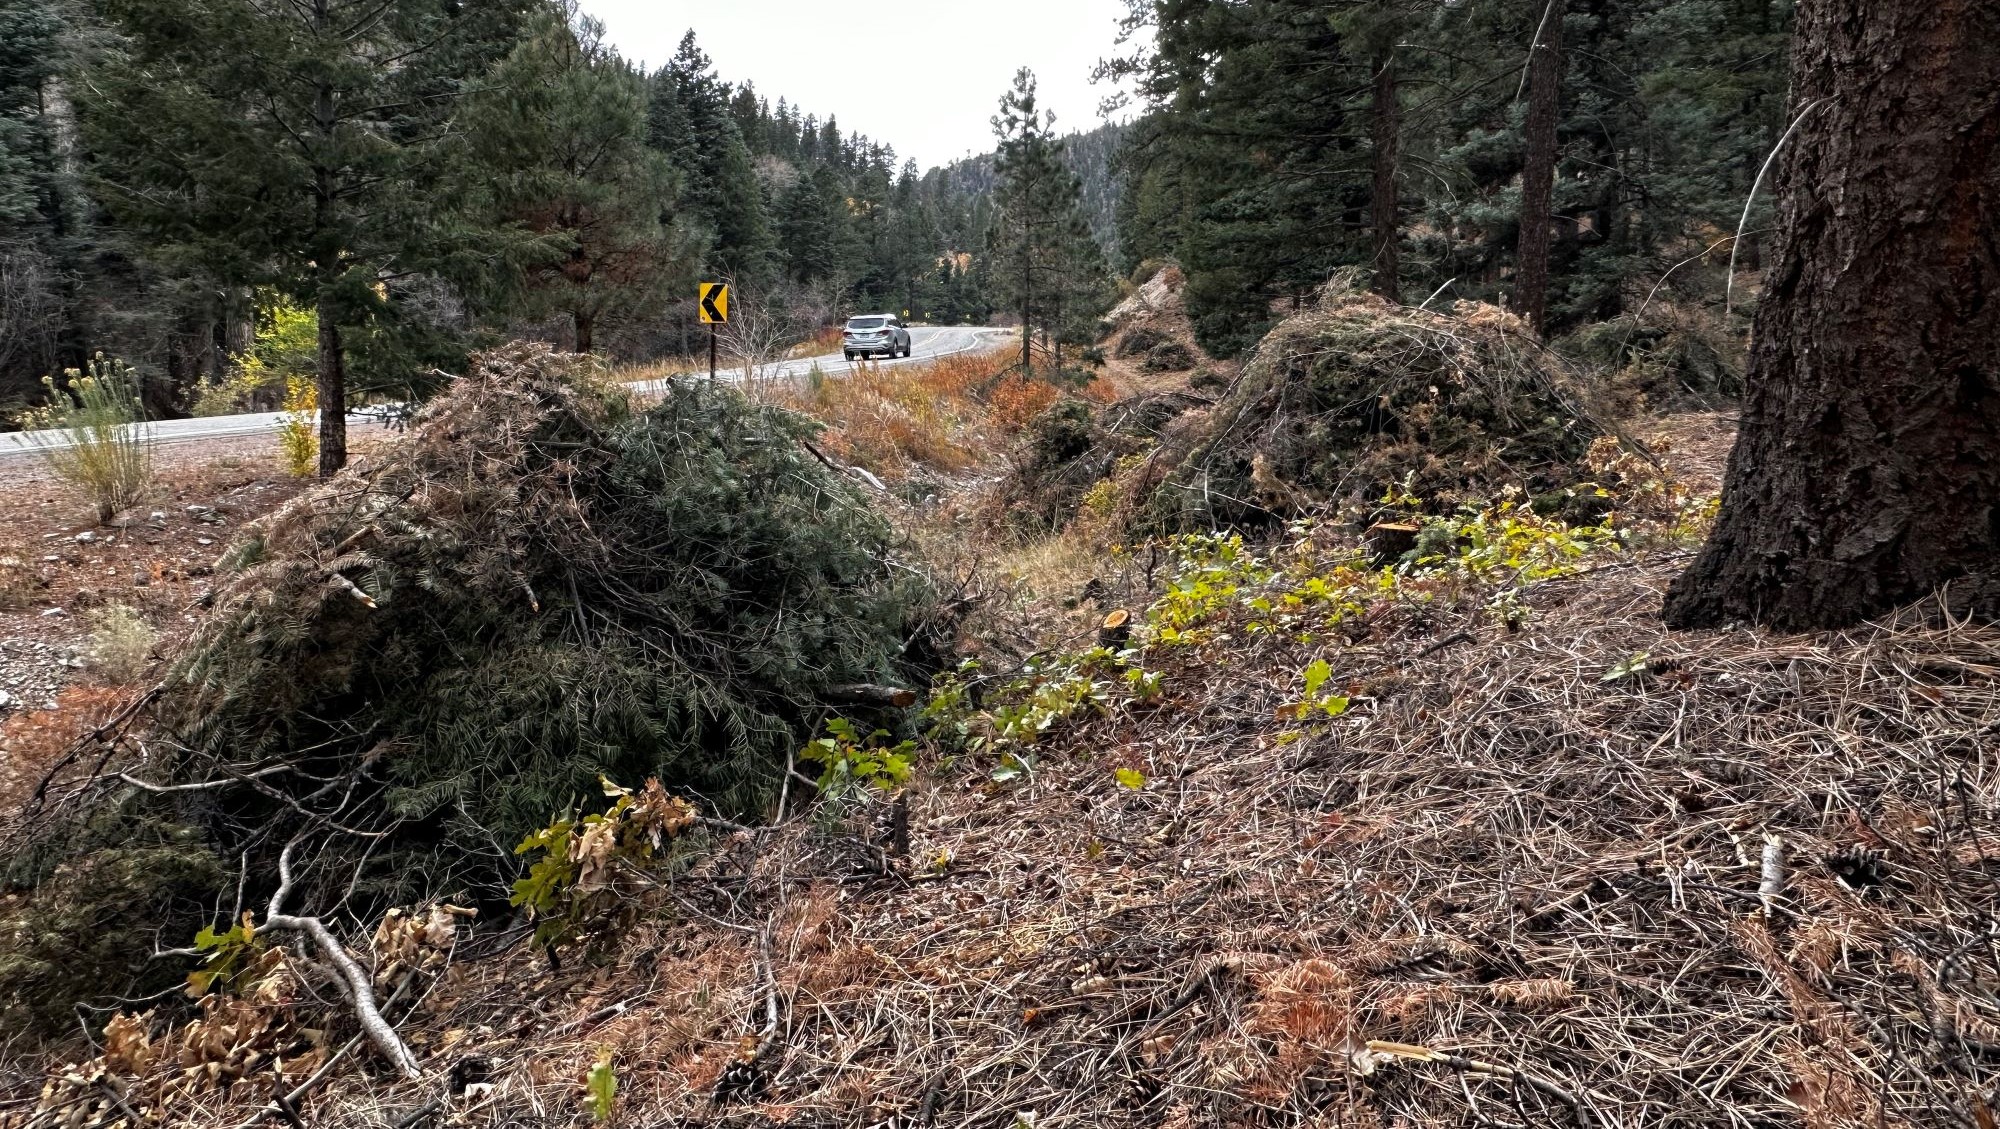 Piles of woody debris along a two-land highway in a forest.